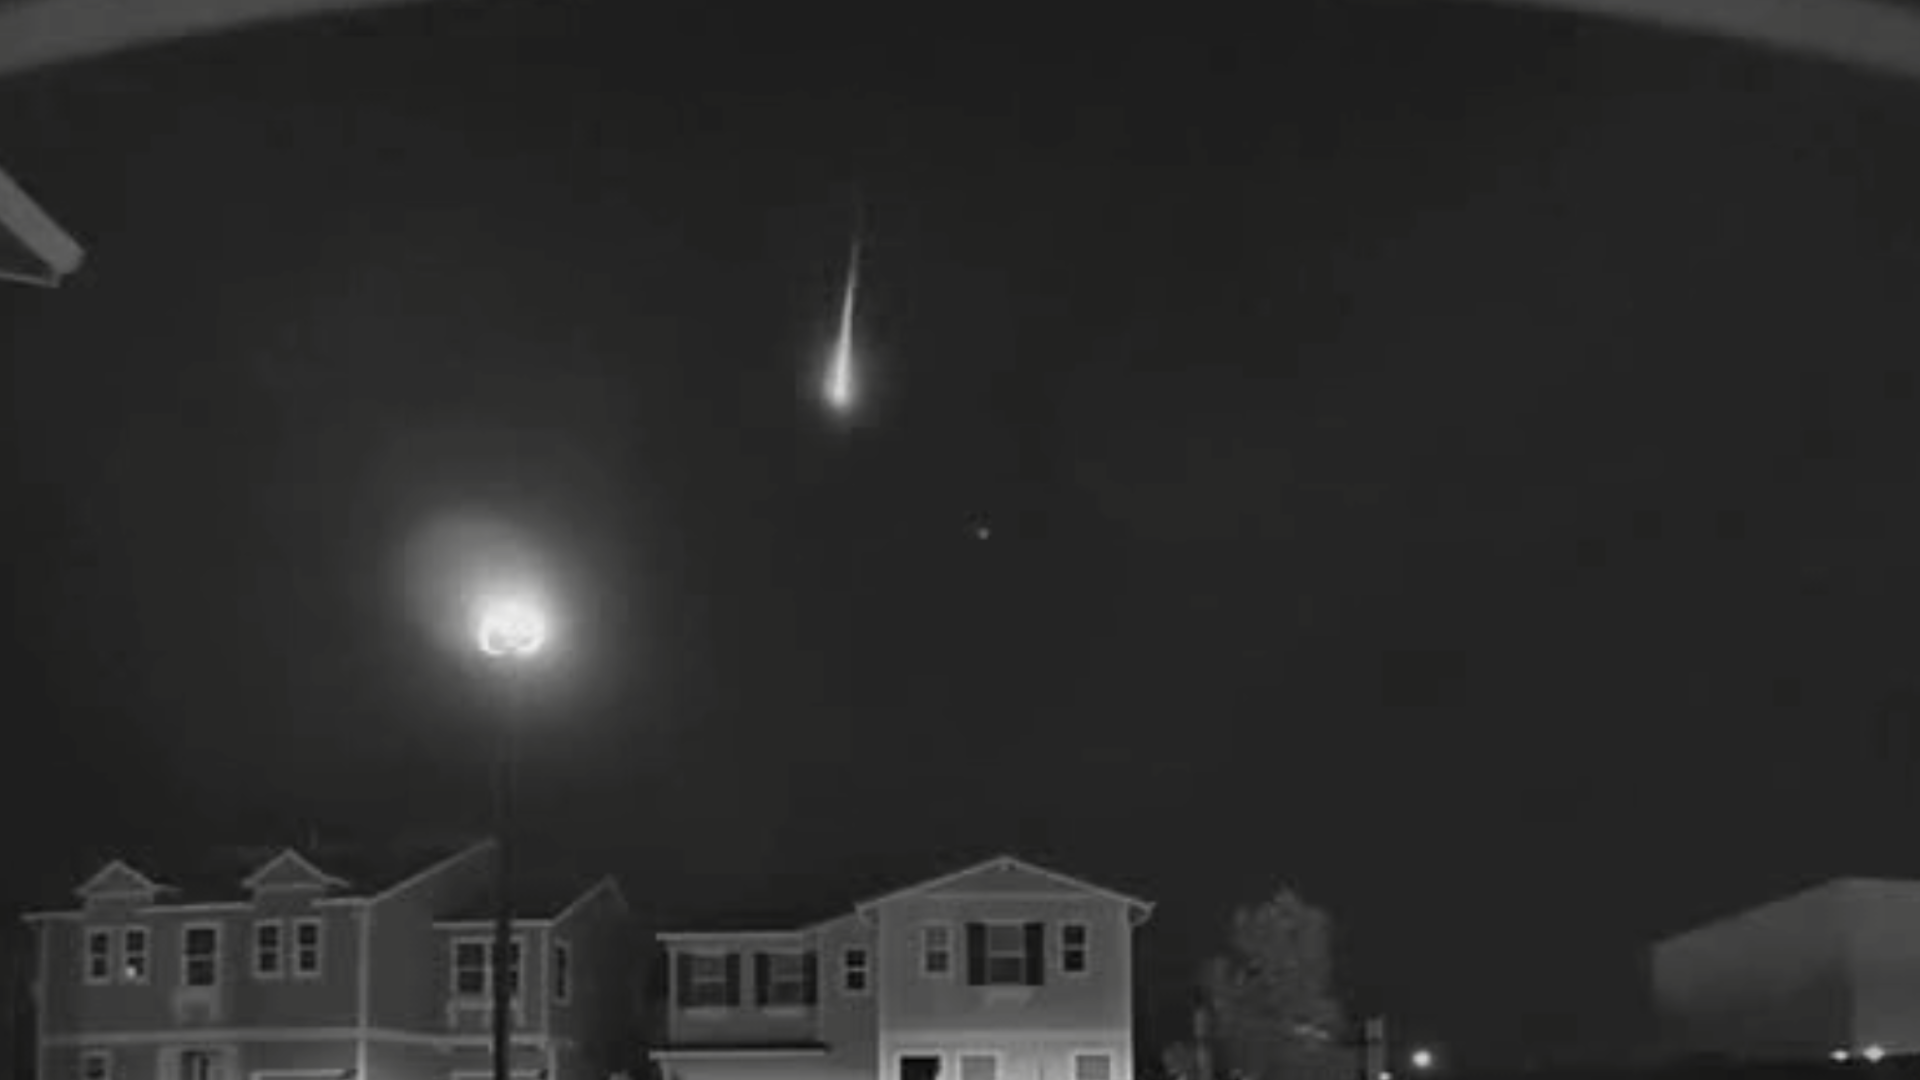 A video in Rocklin captured what appears to be a Perseid meteor shooting across the night sky over the weekend.